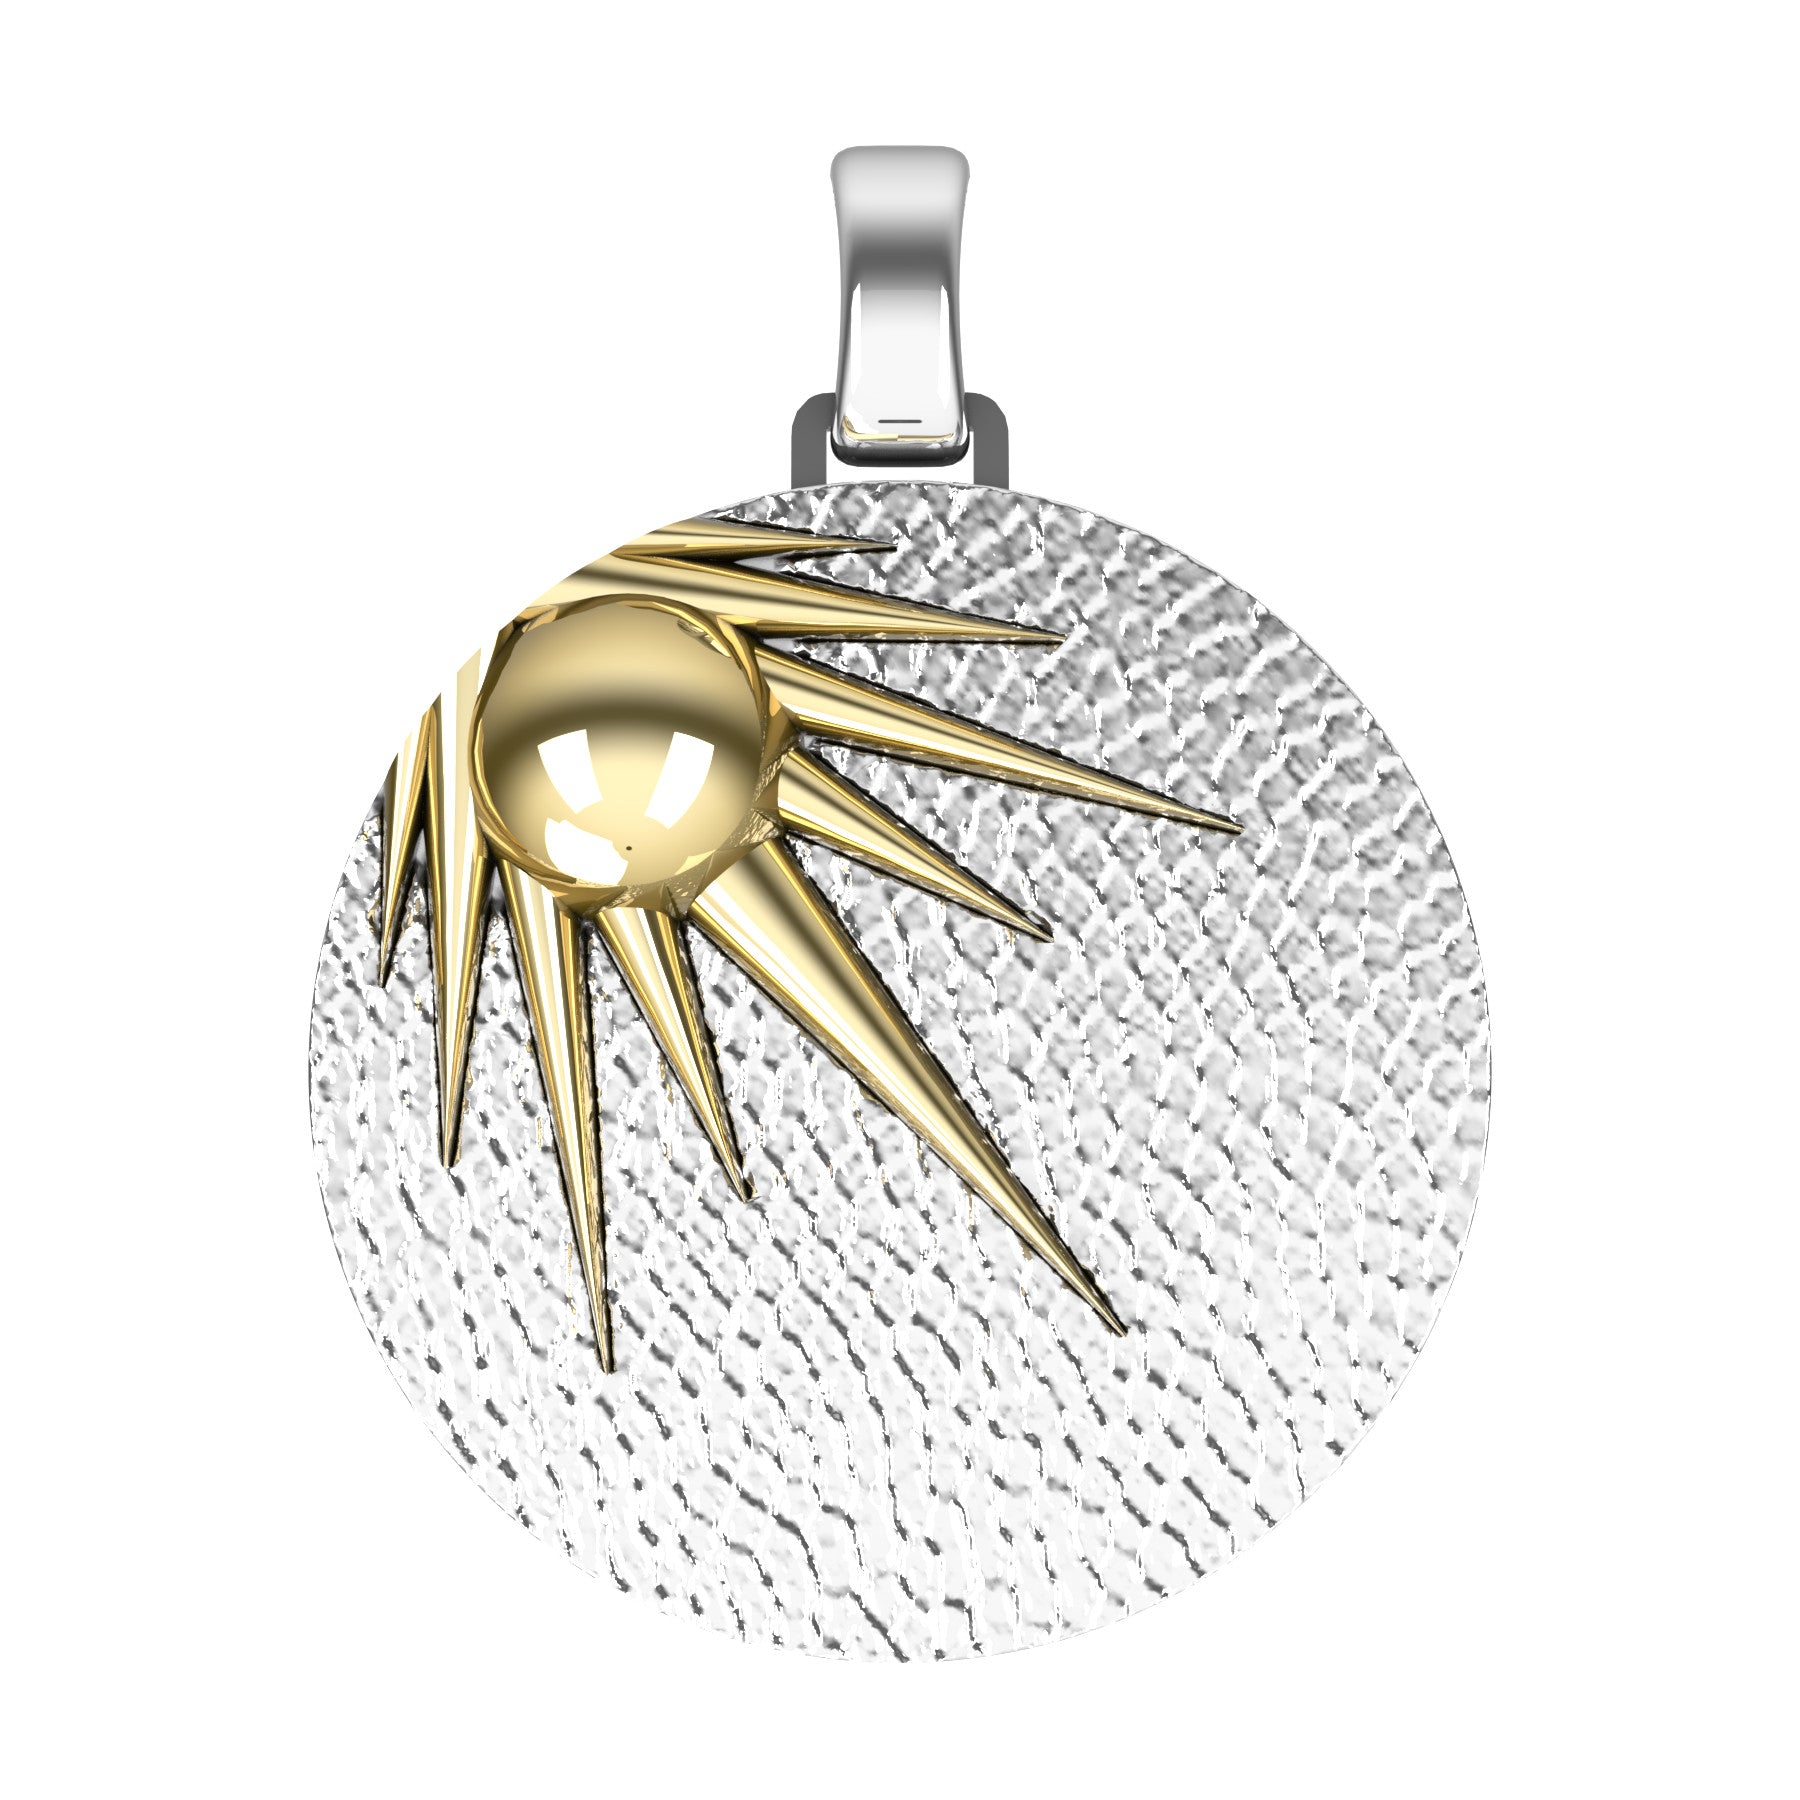 sun pendant, sterling silver and golden sterling silver, weight about 36,0 g (1.29 oz), diameter 40 mm